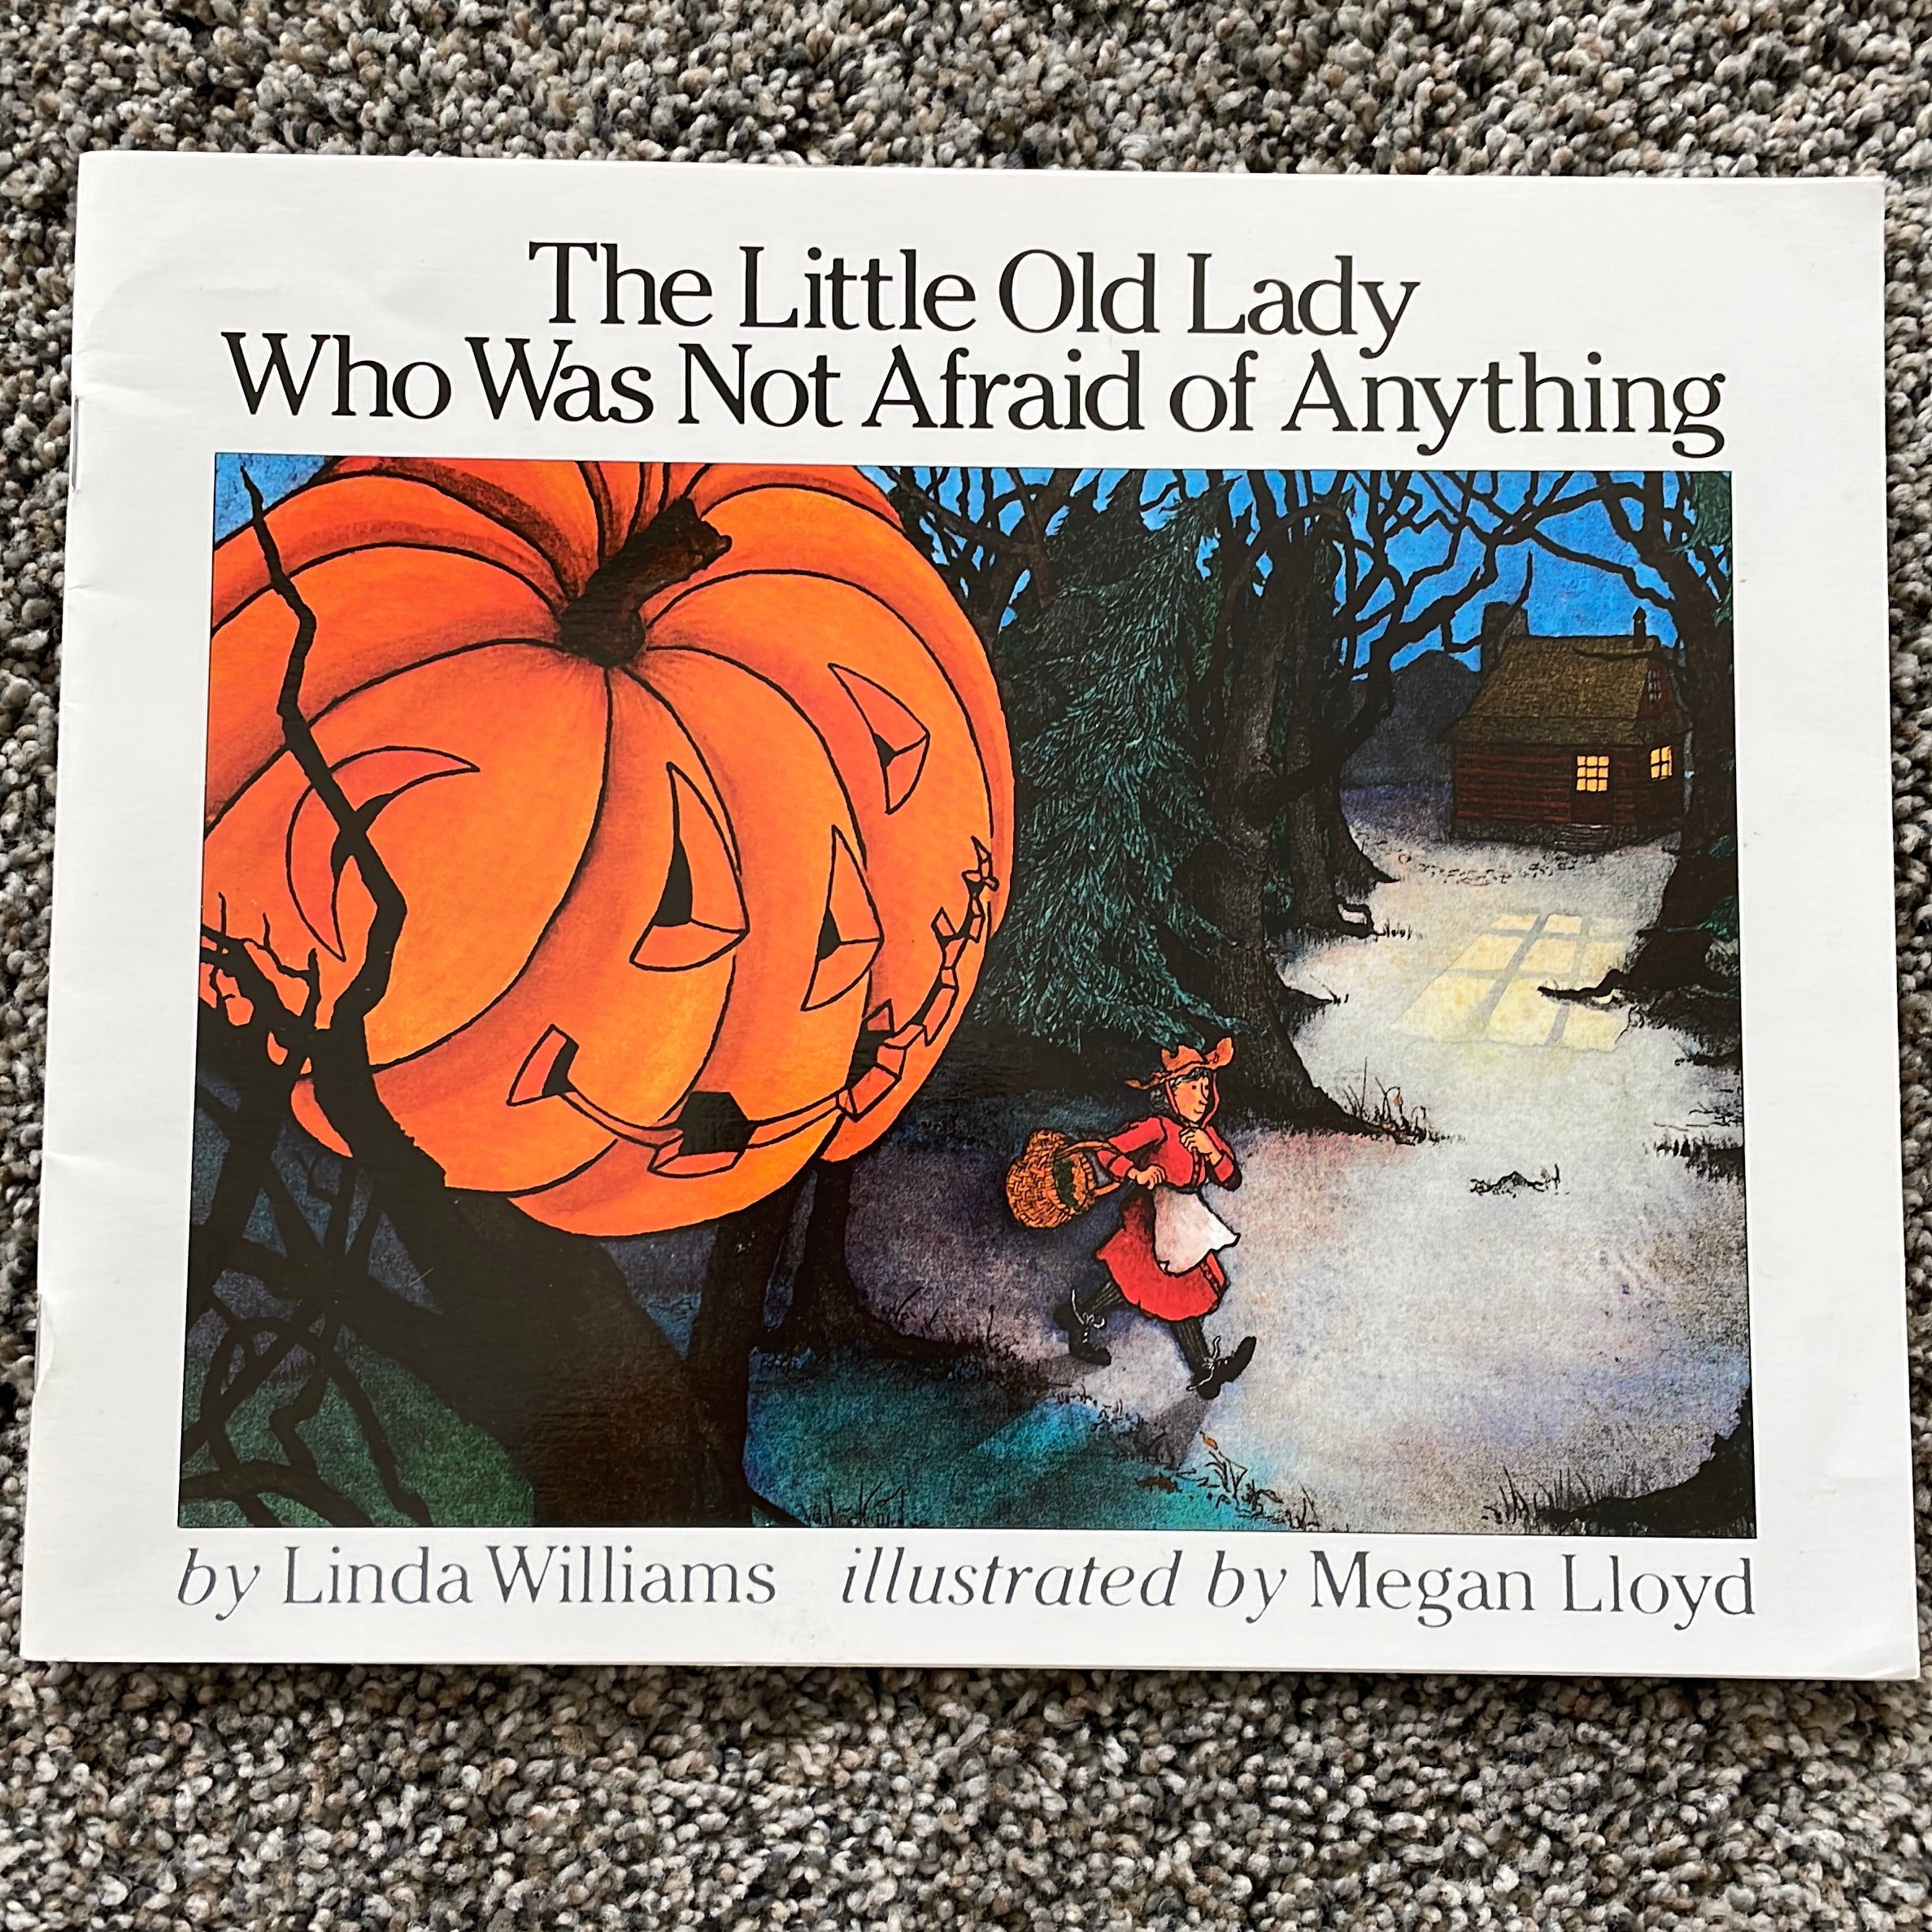 Was　Paperback　Little　by　The　Old　Not　Lady　Williams,　of　Who　Afraid　Pangobooks　Anything　Linda